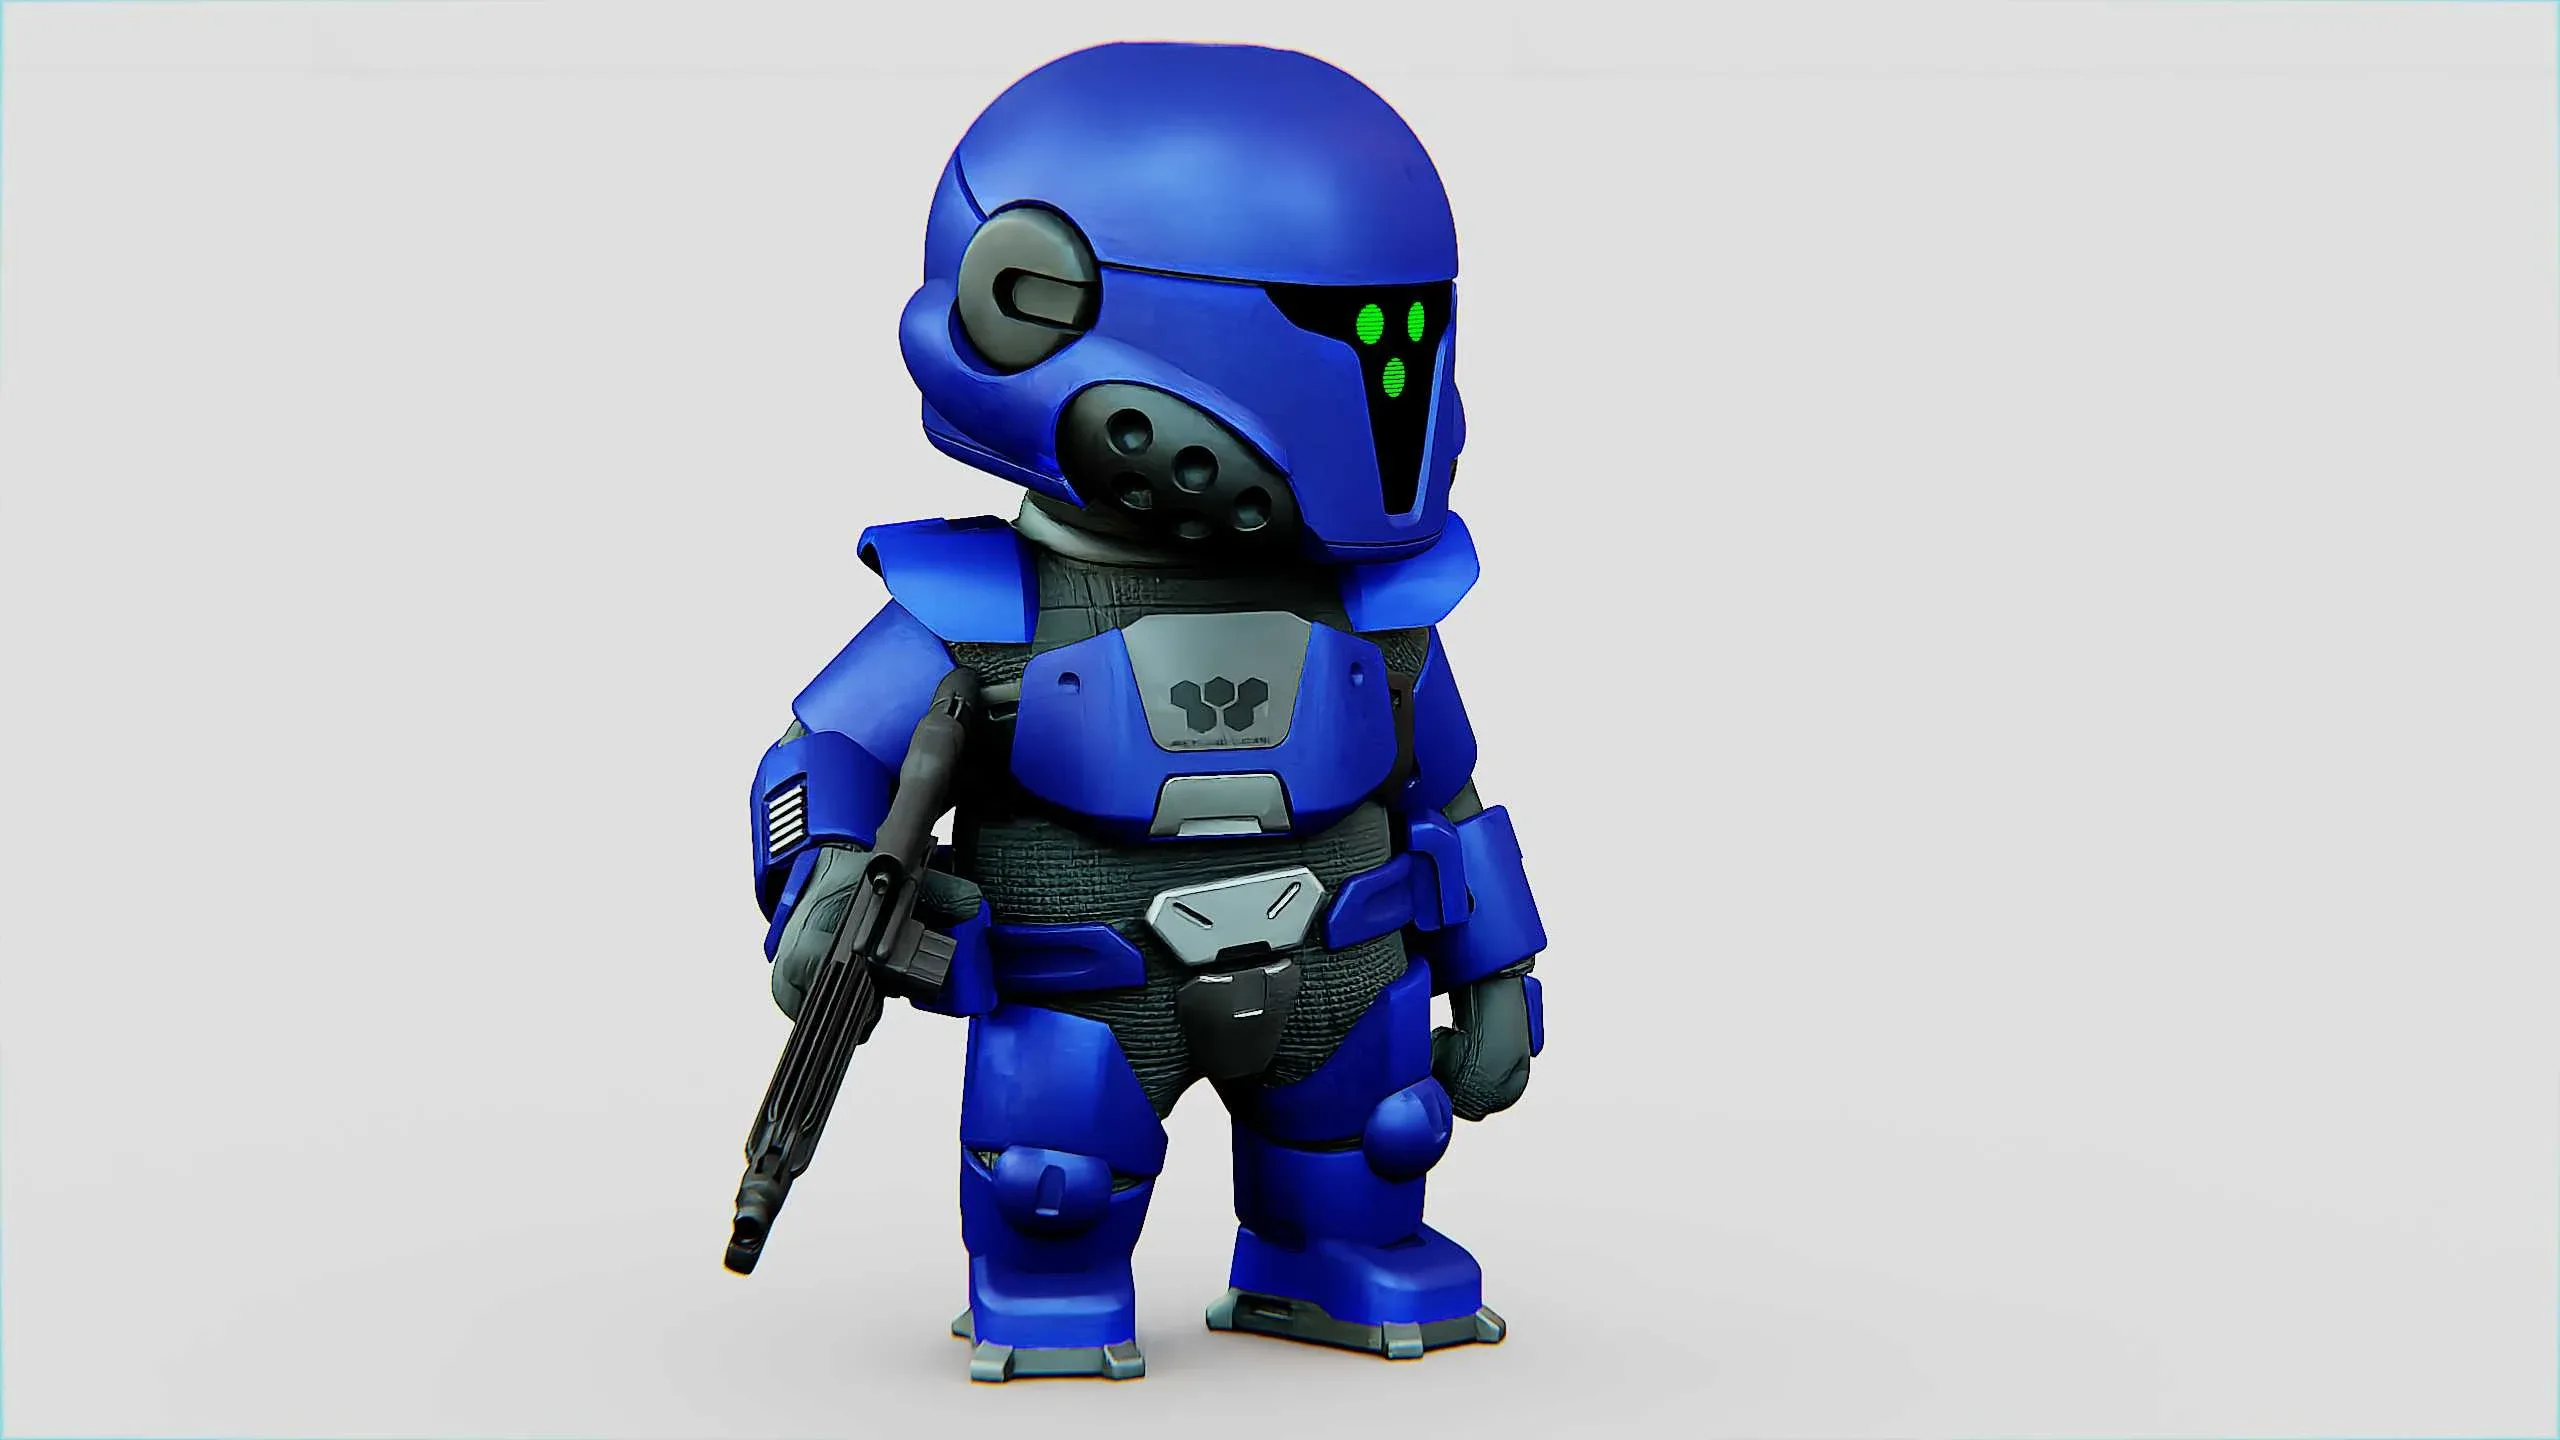 Toon Imperial Trooper R-C Auto-Rig Pro Rigged For Mixamo, Unreal Engine Unity